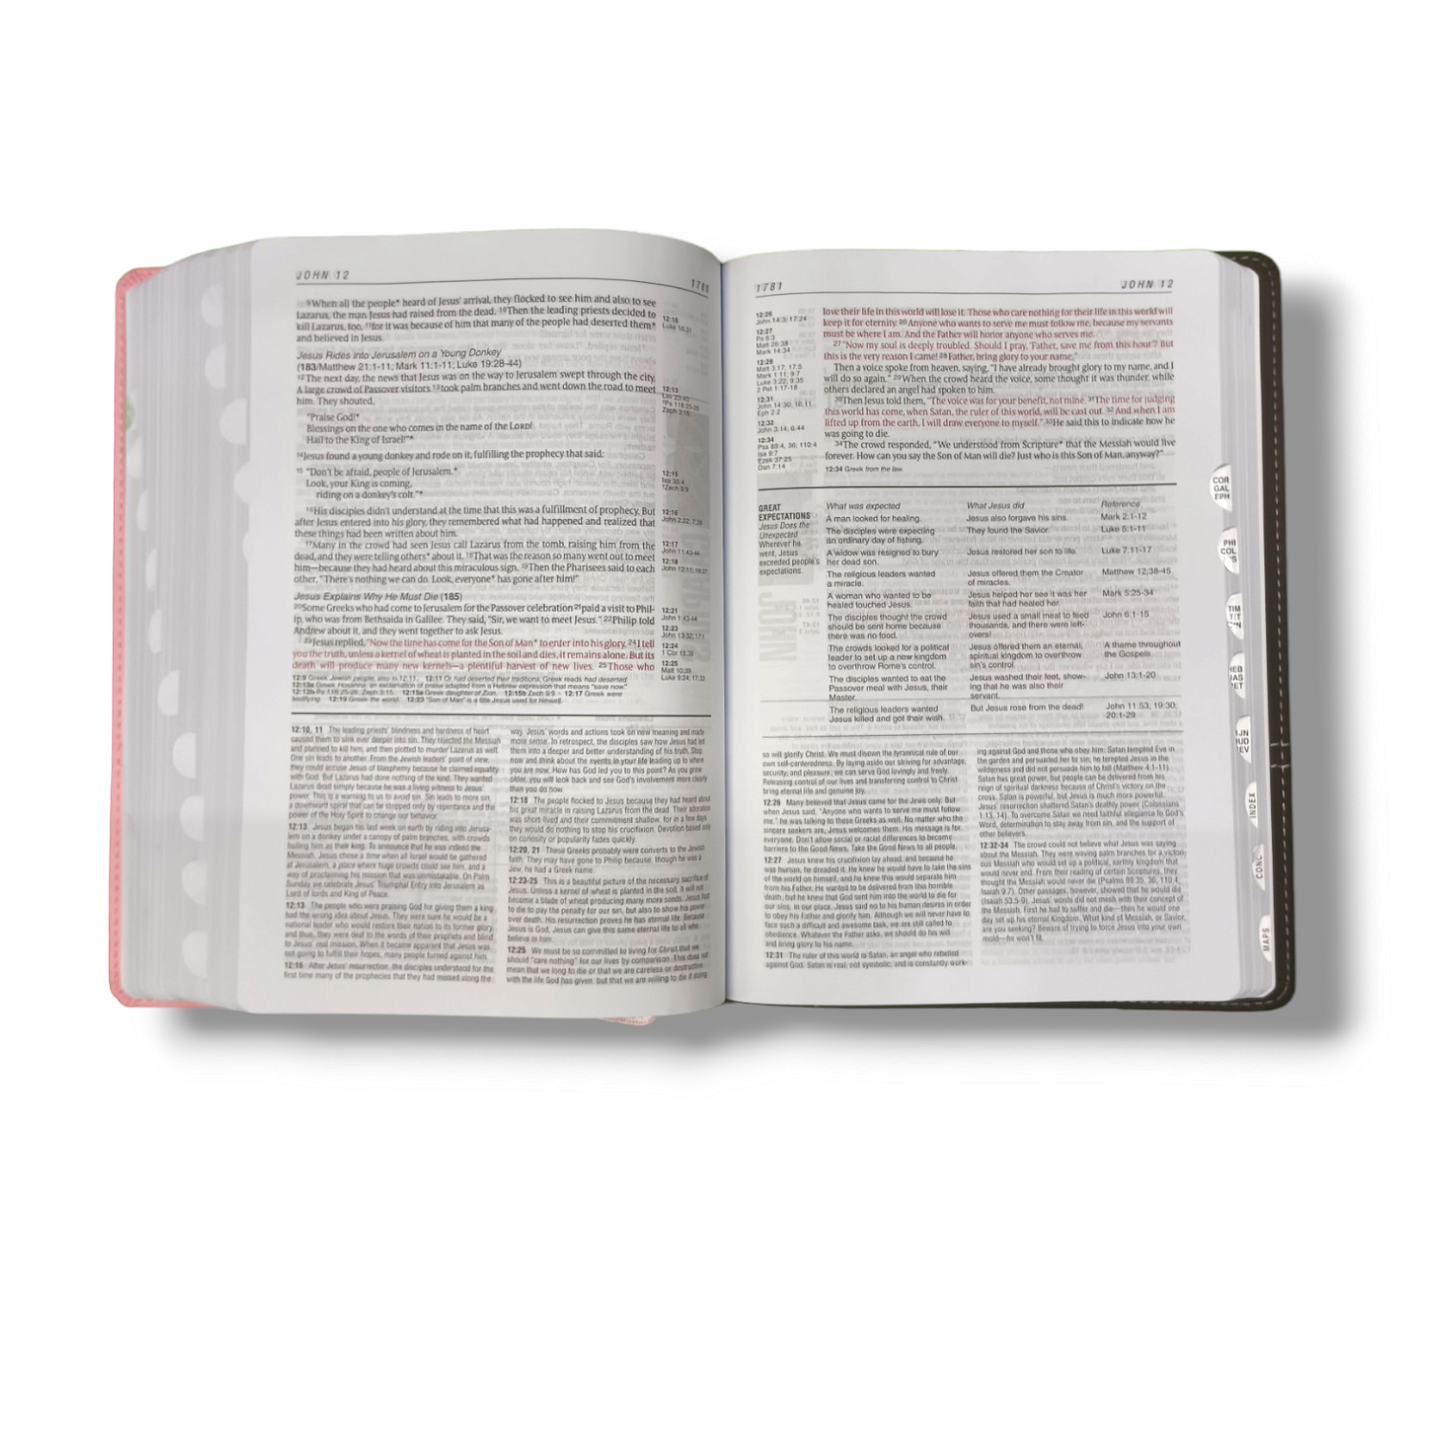 NLT Life Application Study Bible | Attractive Dark Brown/Pink Leather Edition | With Thumb Edition | New Edition